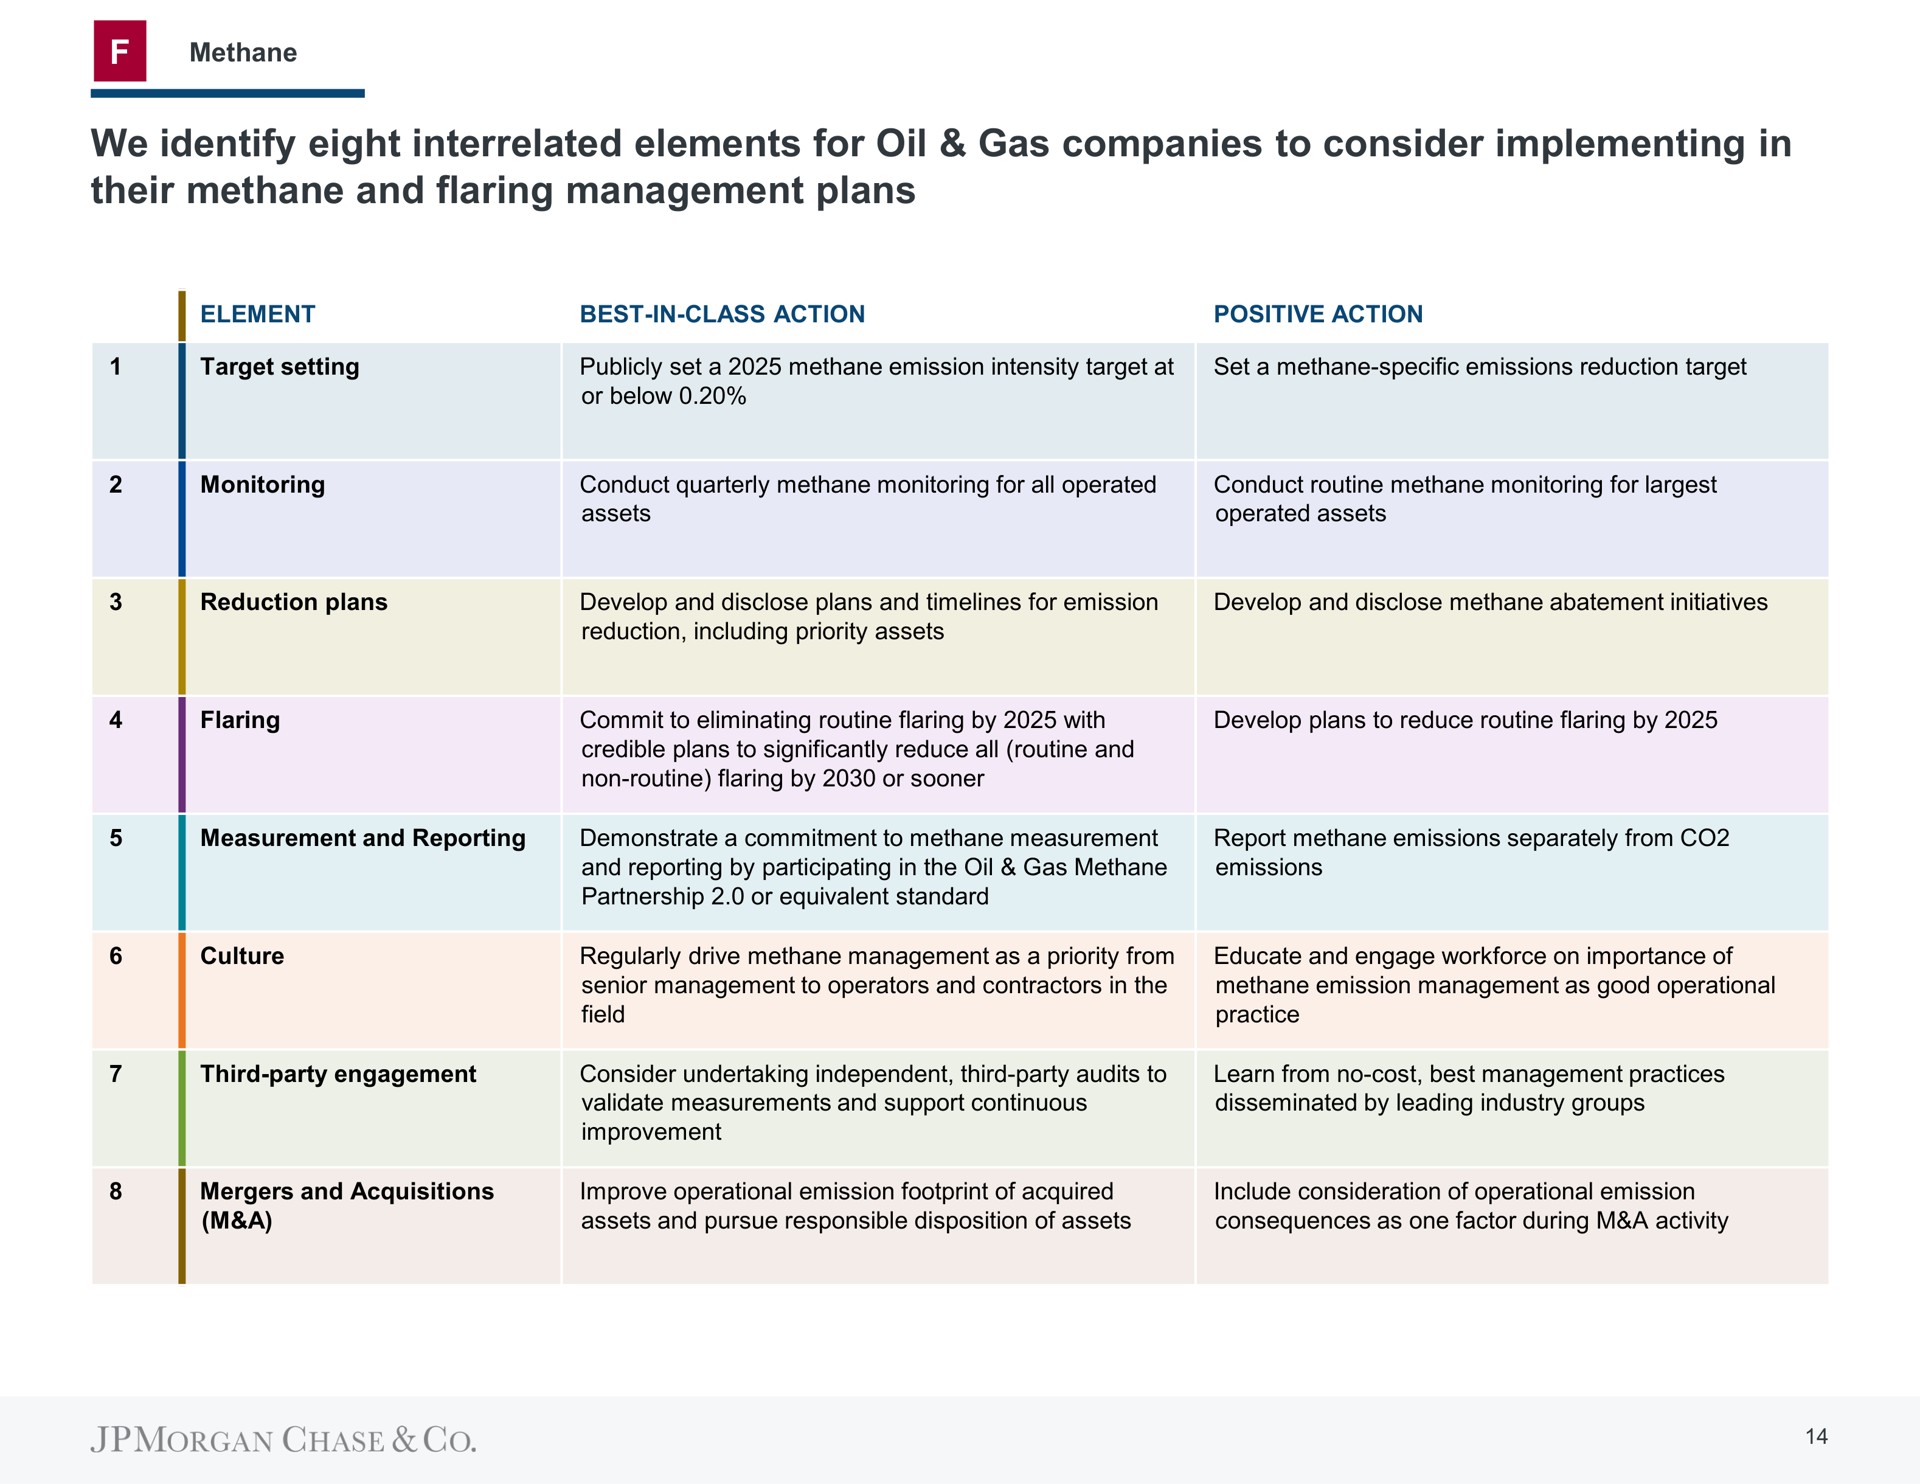 we identify eight interrelated elements for oil gas companies to consider implementing in their methane and flaring management plans | J.P.Morgan